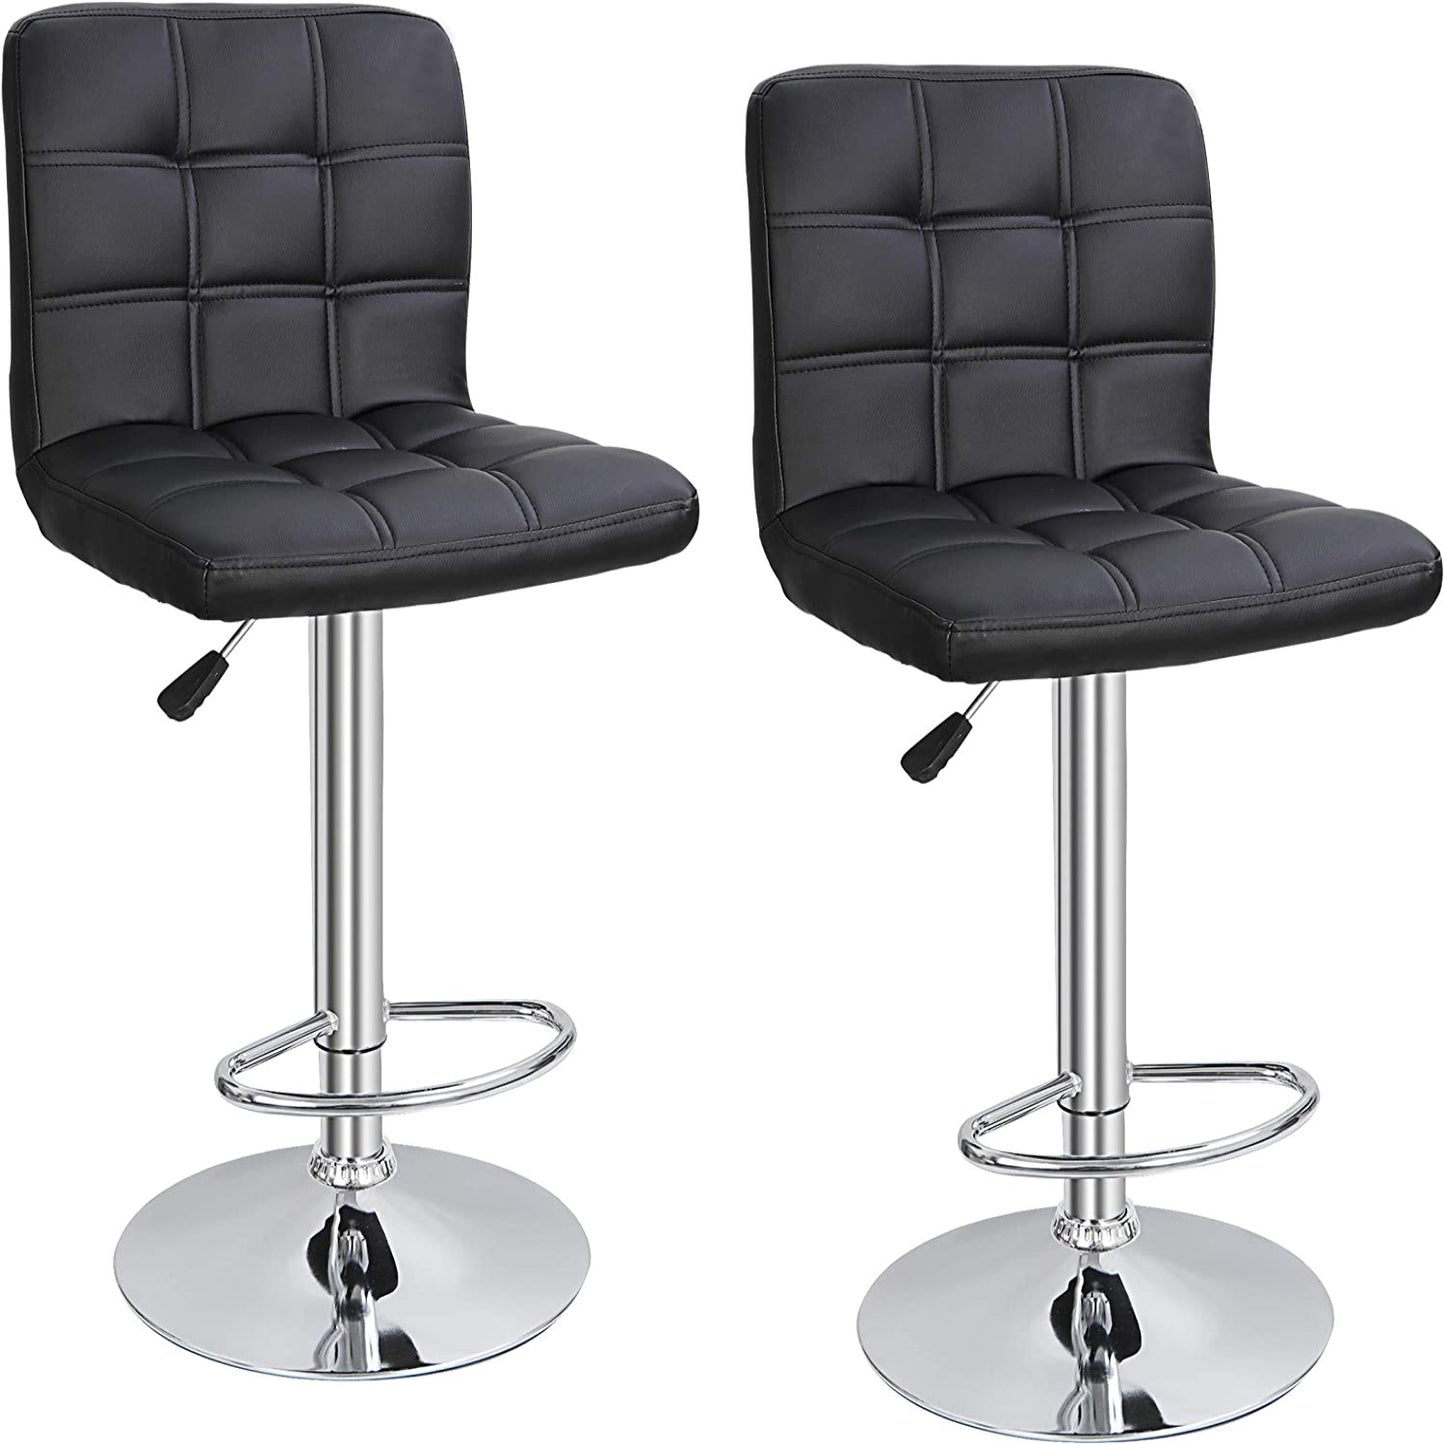 Adjustable Swivel Barstools Set of 2, Modern PU Leather Kitchen Counter Bar Stool/Chair, Square Back Bar Stool